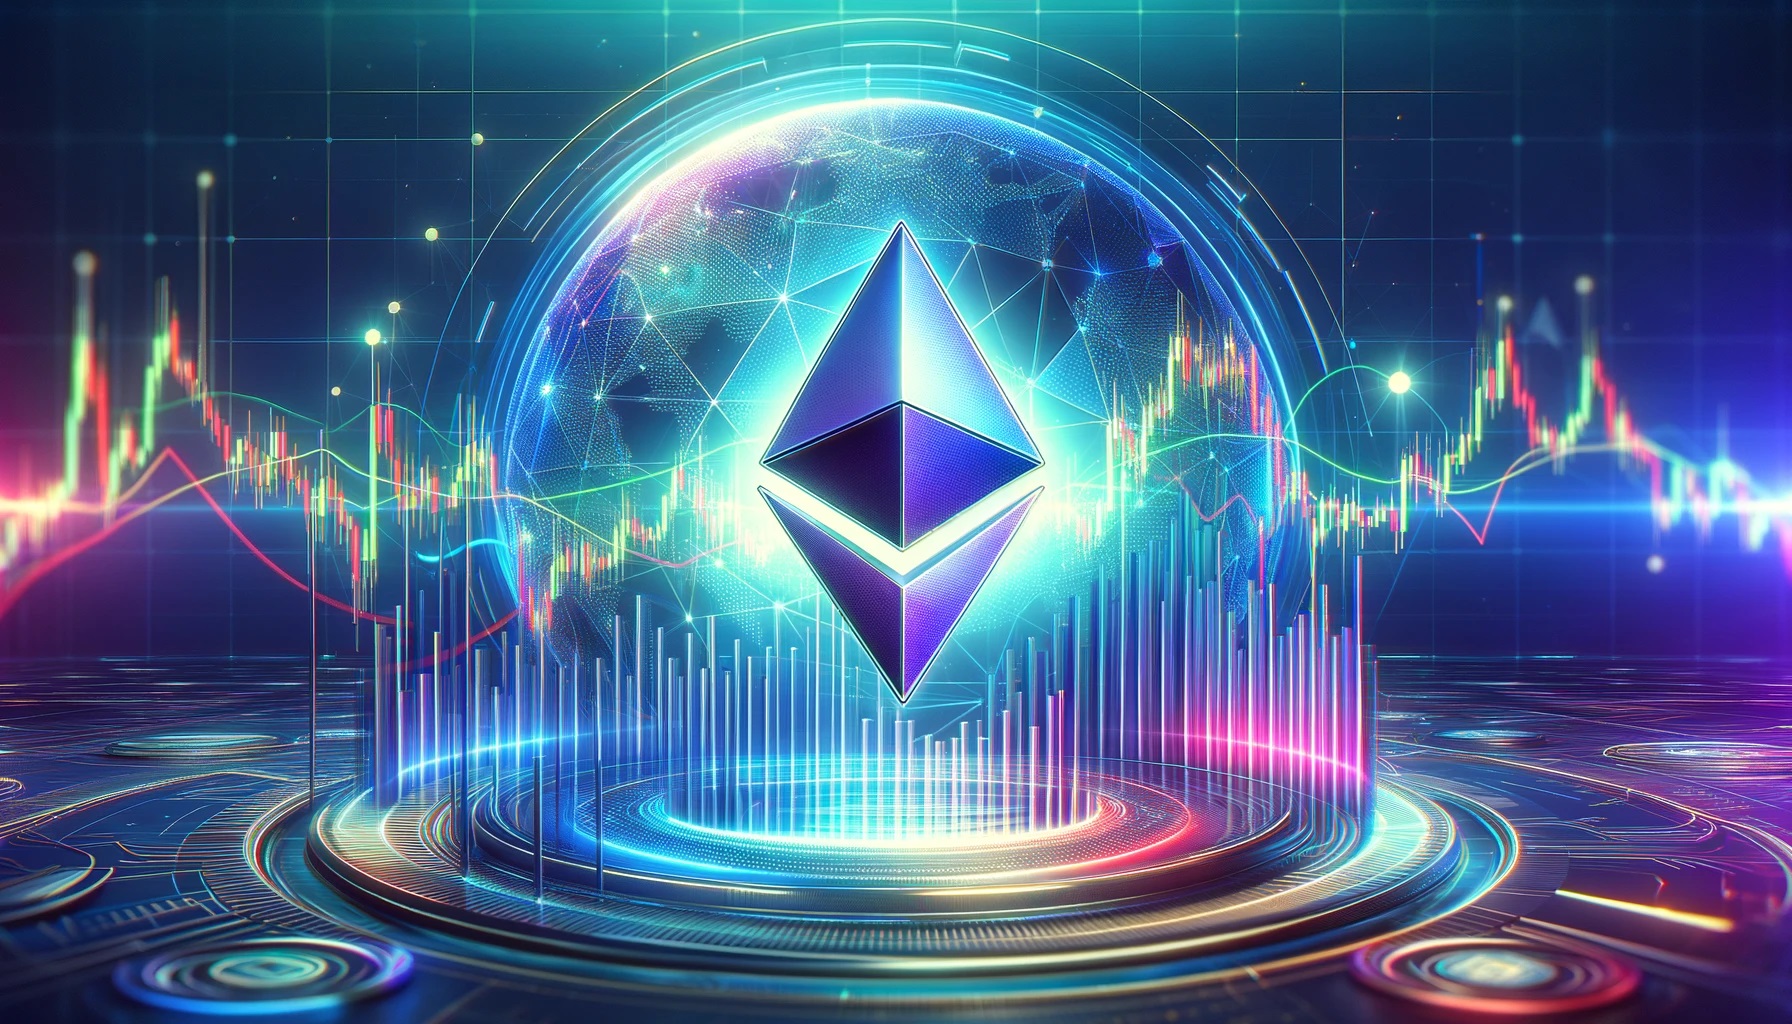 Featured image for “Ethereum Price Surges Over $3,100: Potential Breakout on the Horizon”